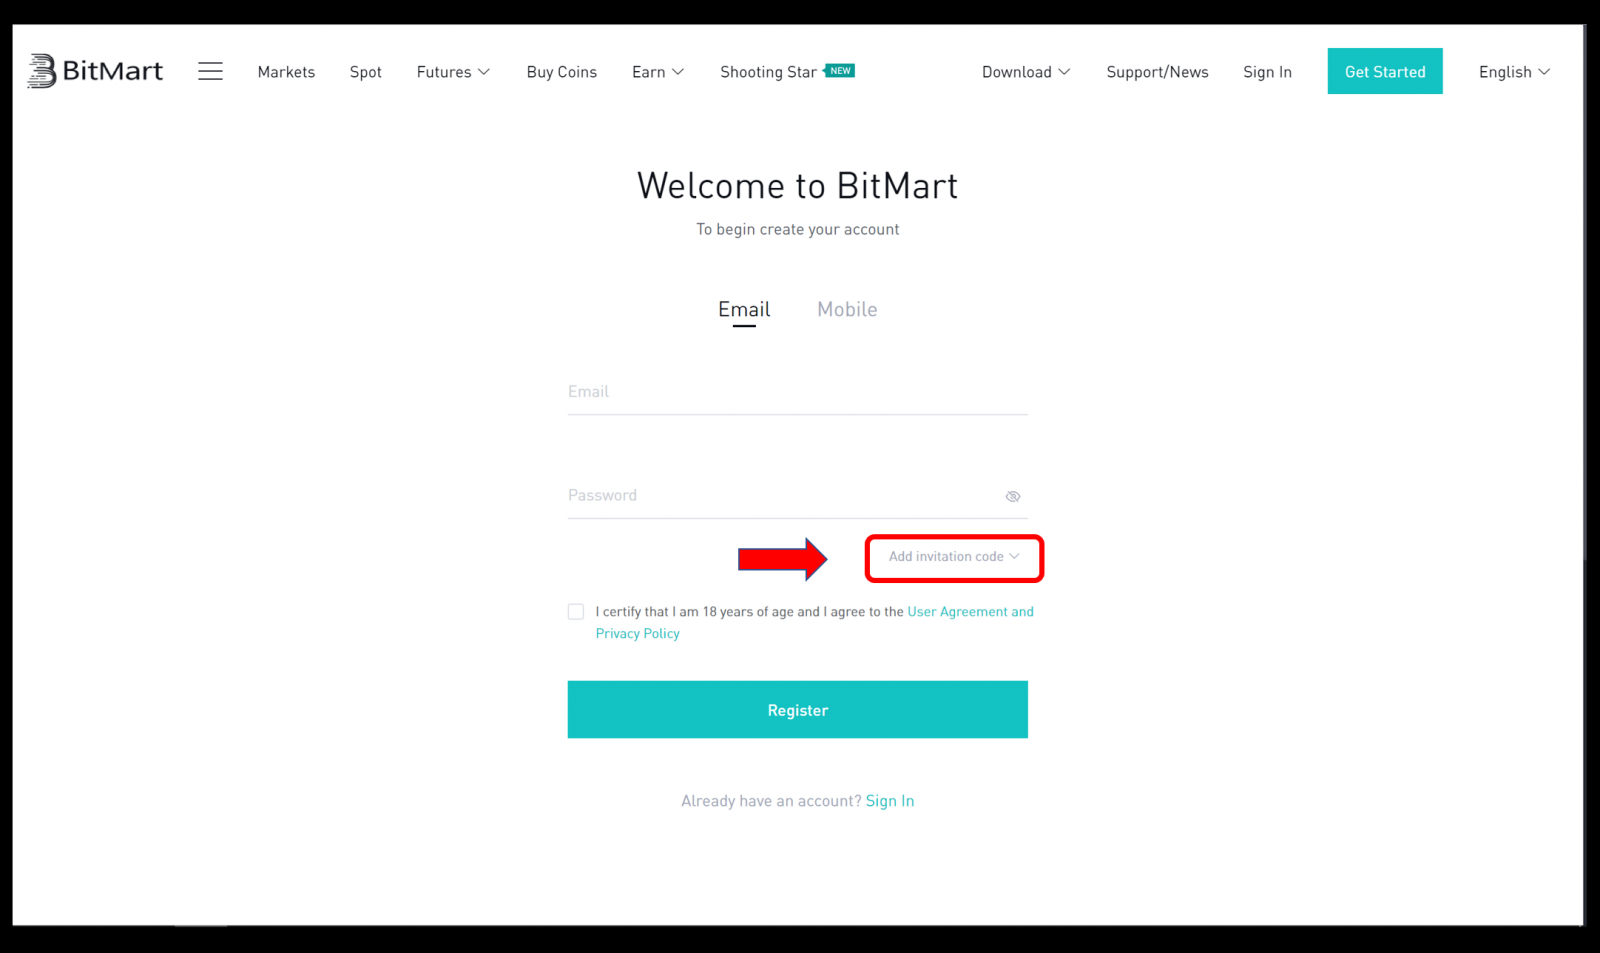 How to Register and Verify Account in BitMart